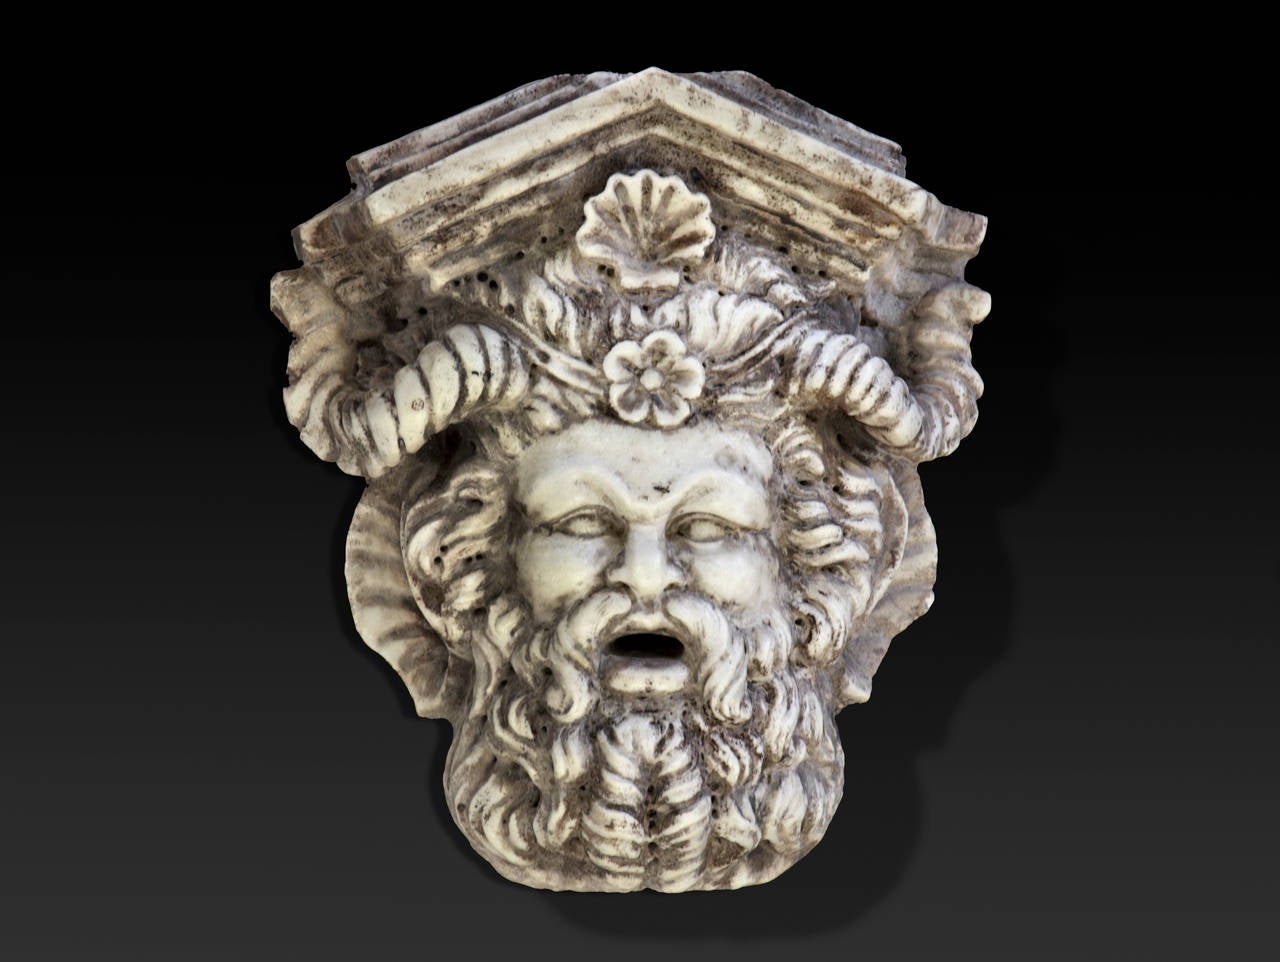 20th century, the horned and bearded visage beneath a pediment, the open mouth as the water aperture.